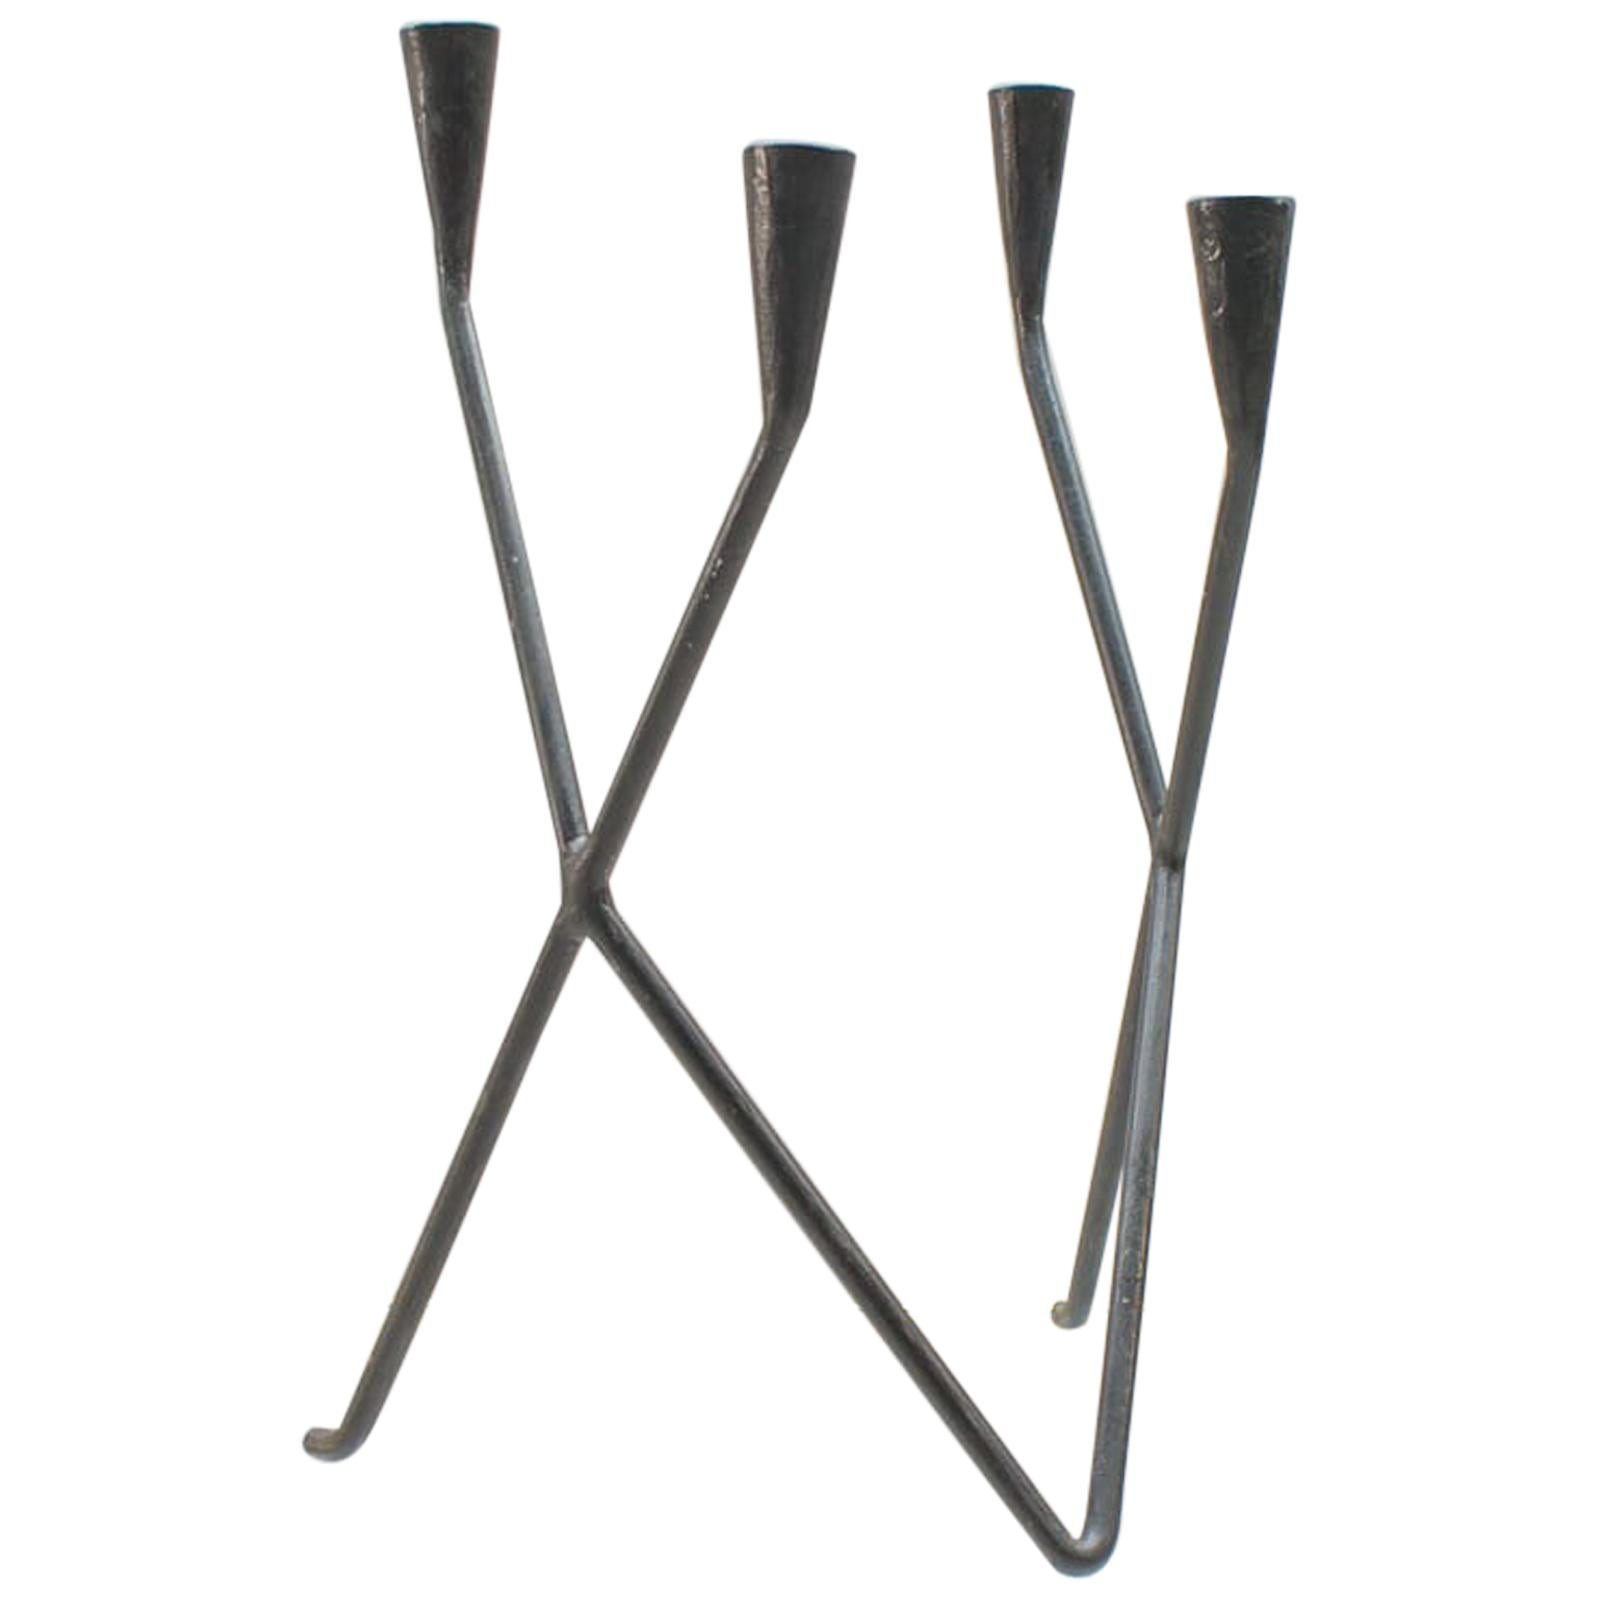 Midcentury Handcrafted Iron Candleholder from Germany, 1950s For Sale